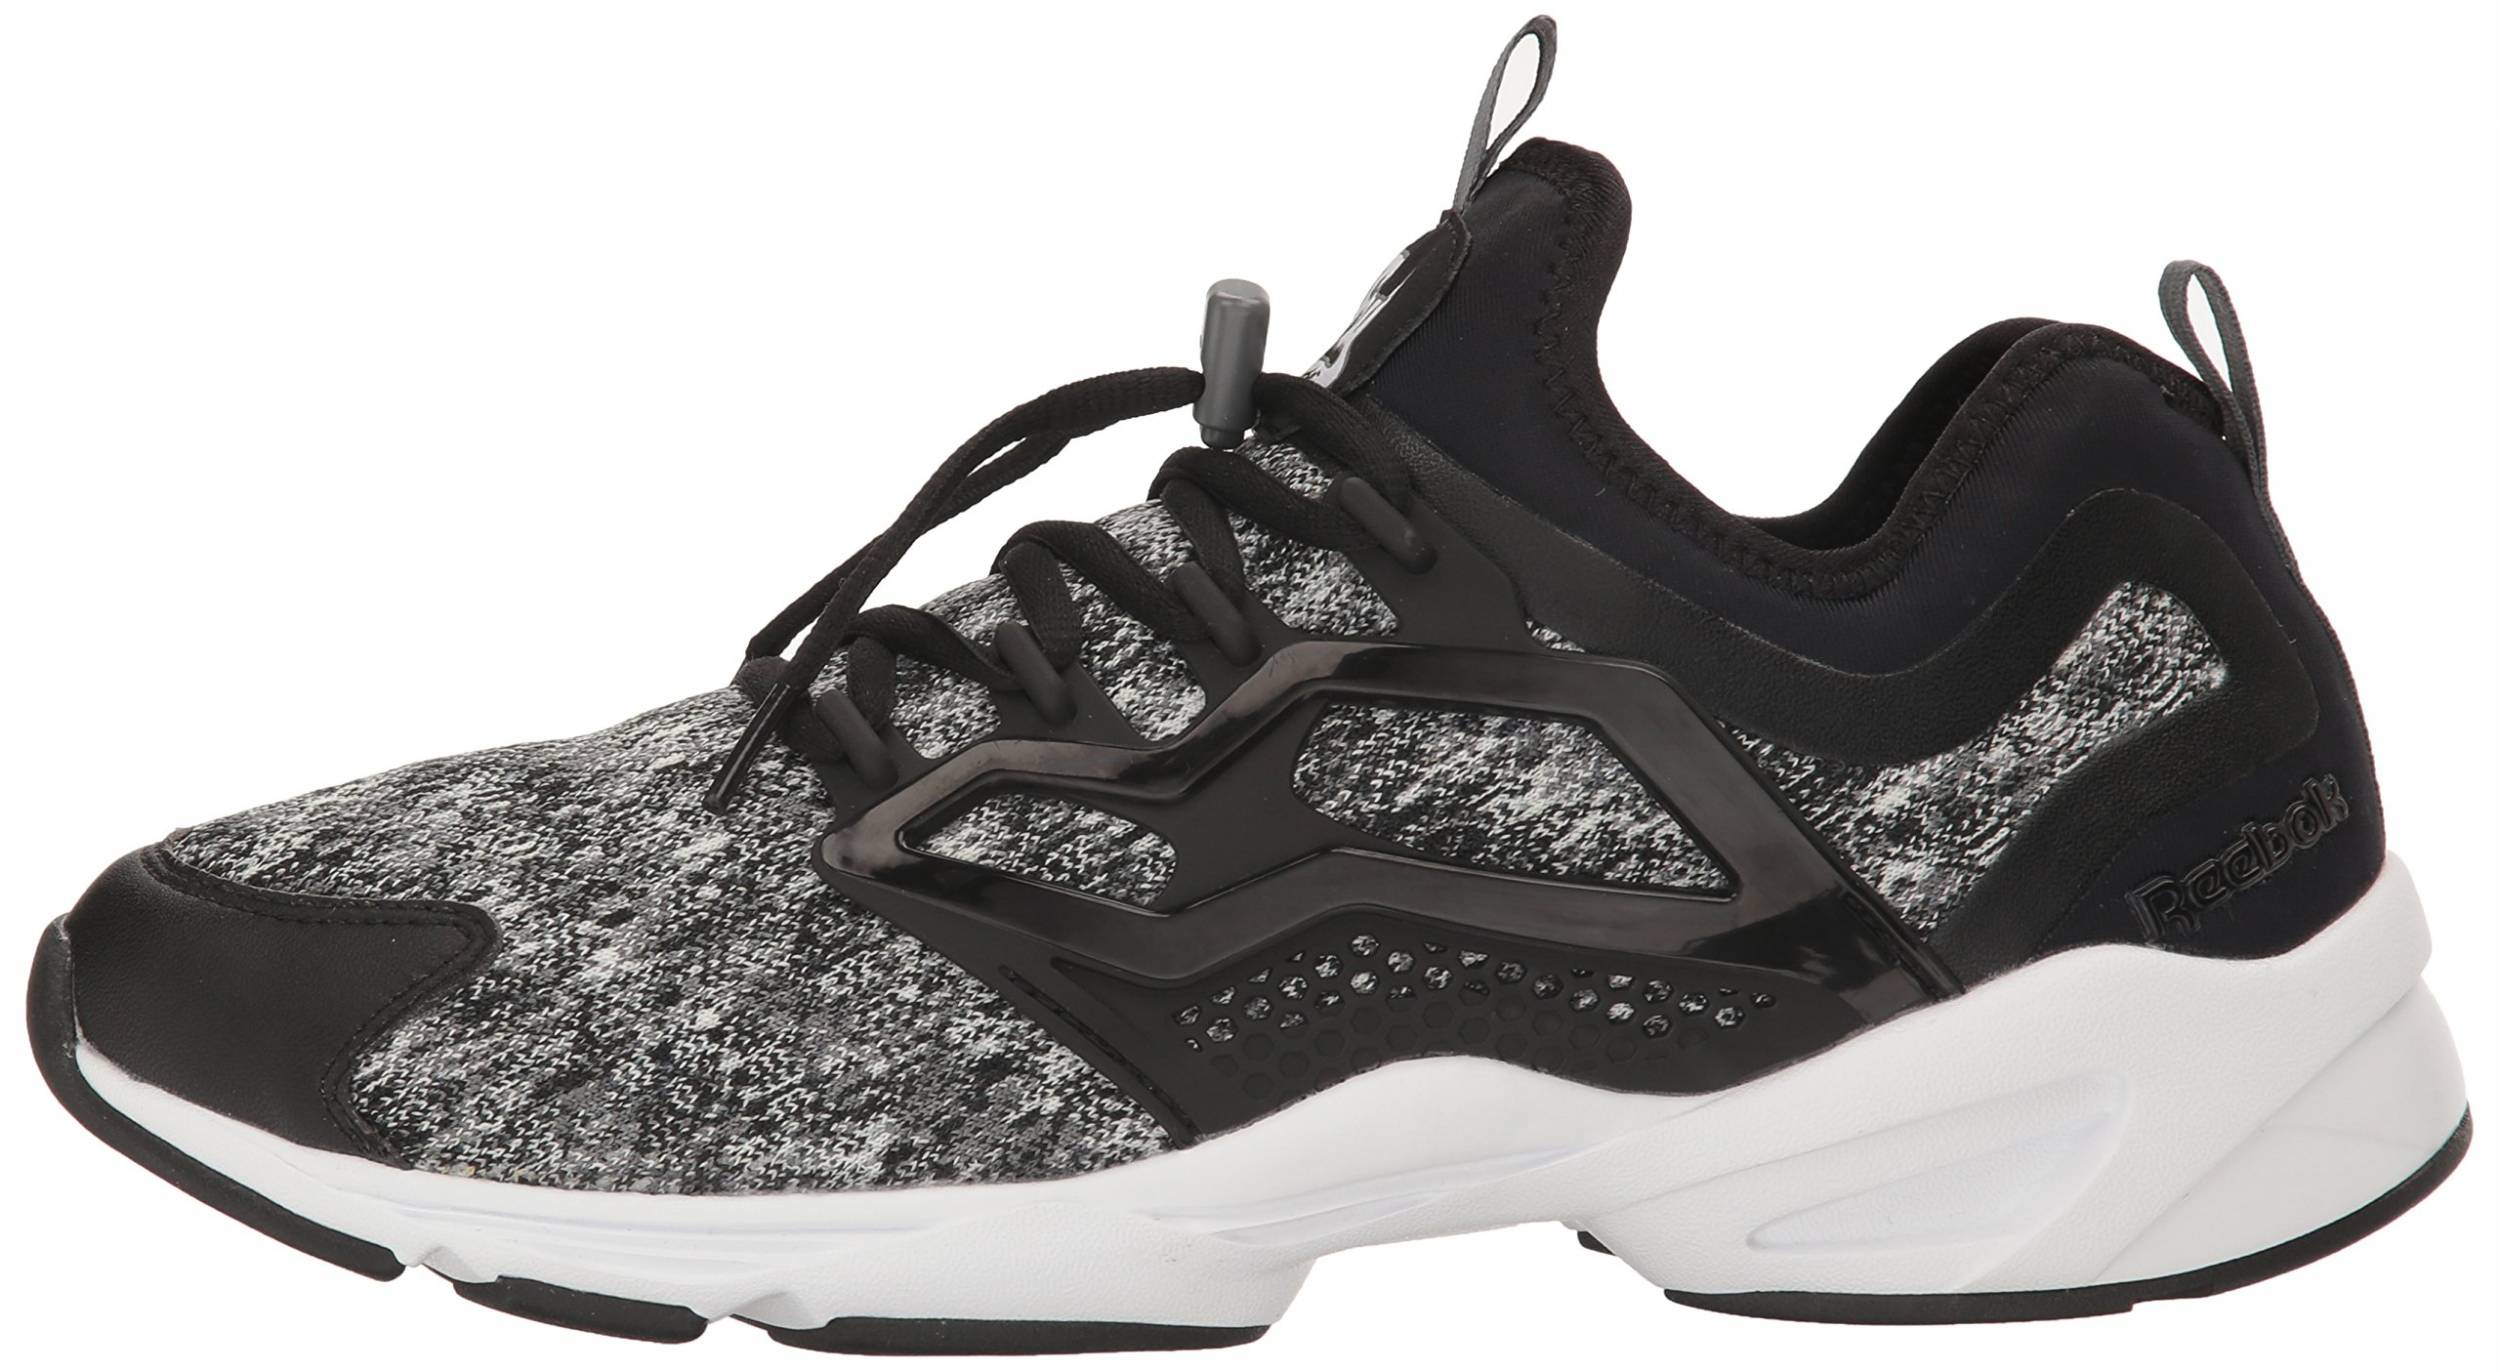 Only $61 + Review of Reebok Fury Adapt MA | RunRepeat